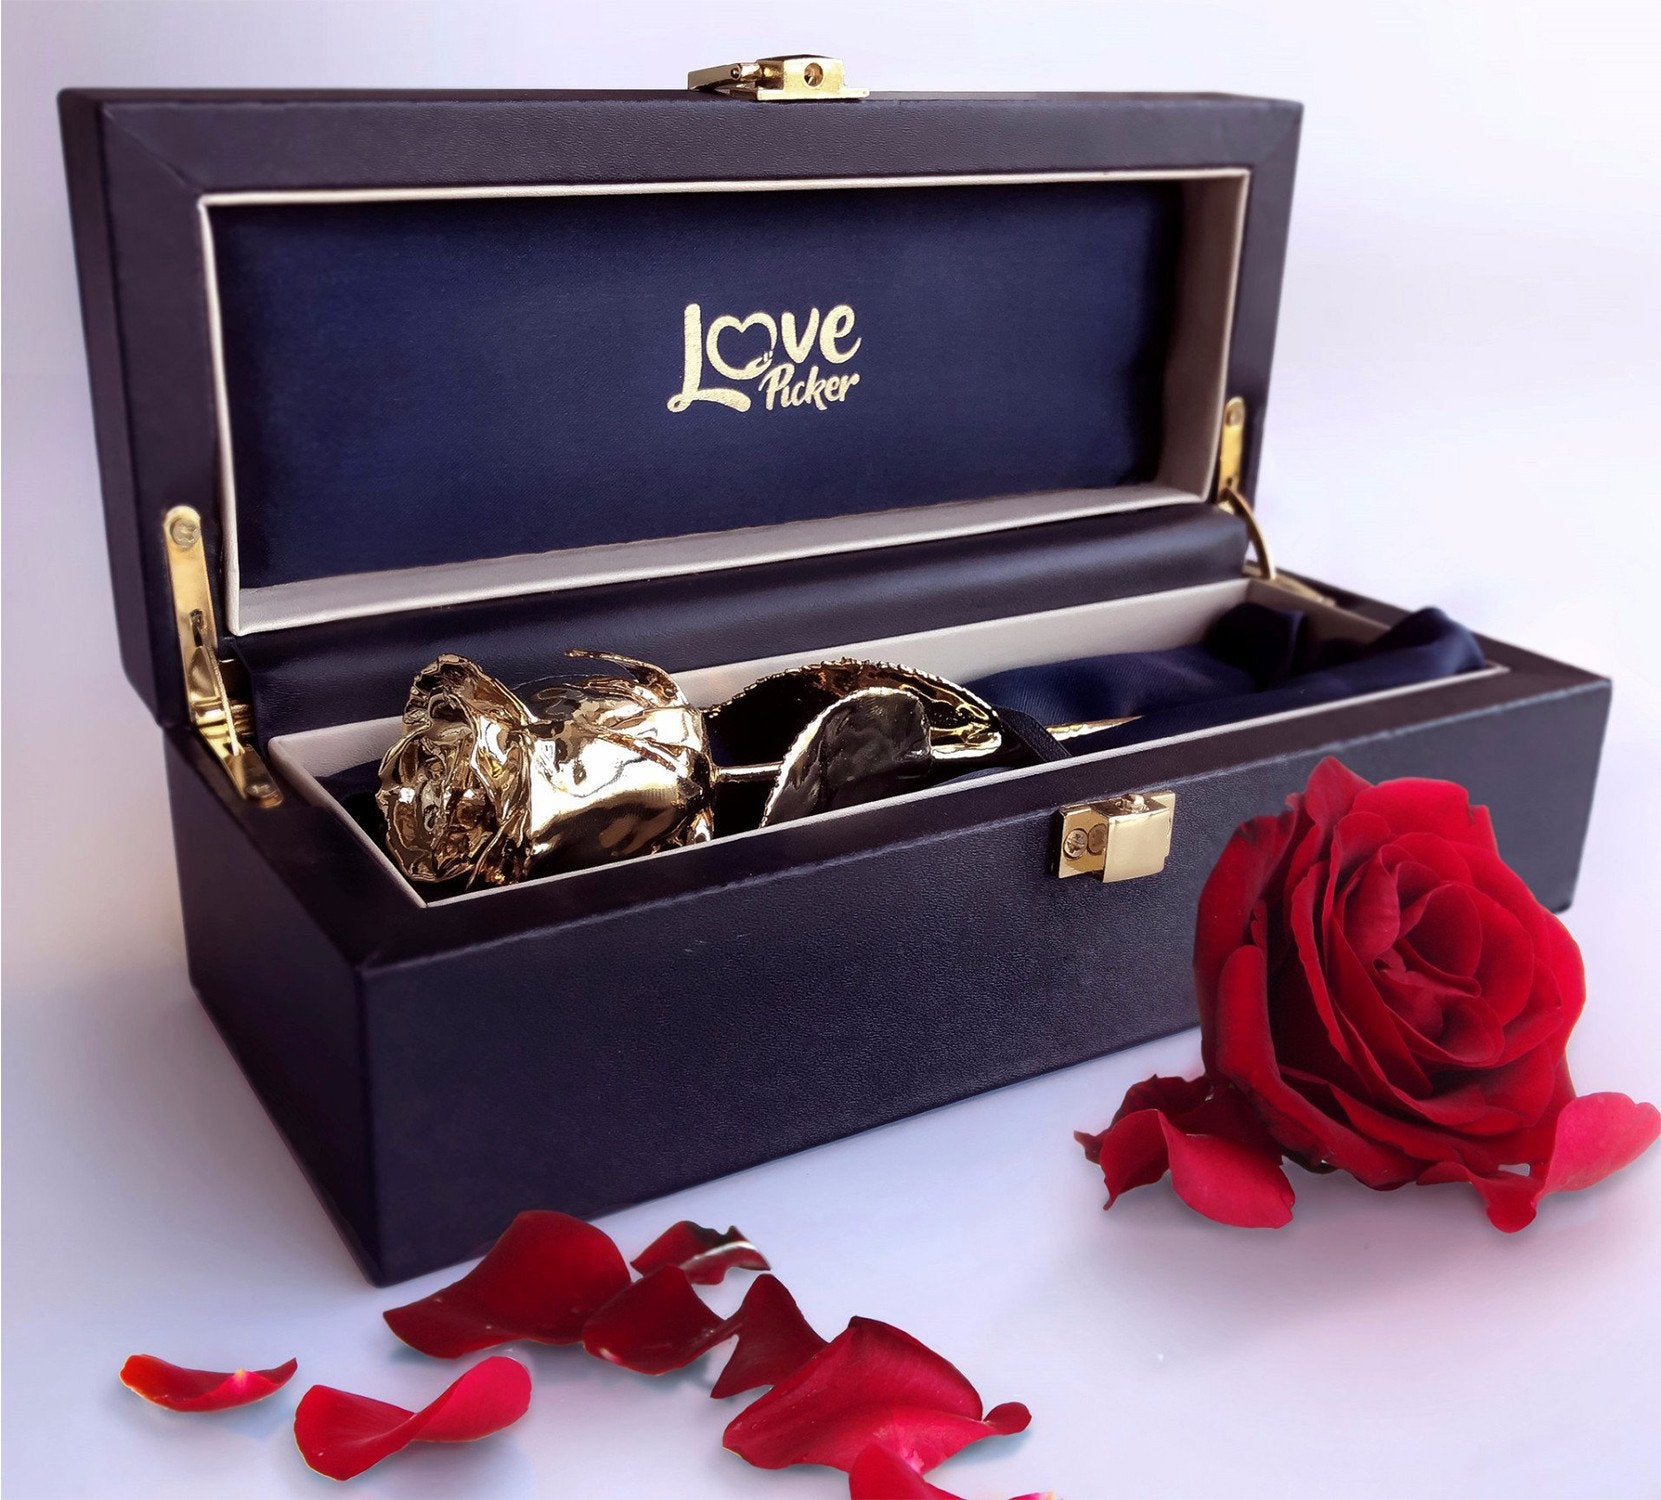 GreenCor Anniversary Gifts for Her, Anniversary Wife, Women – Engraved  Wooden Gift Set 'to My Beautiful Wife' Includes Crystal Engraved Heart, 24K Gold Dipped Rose, Birthday